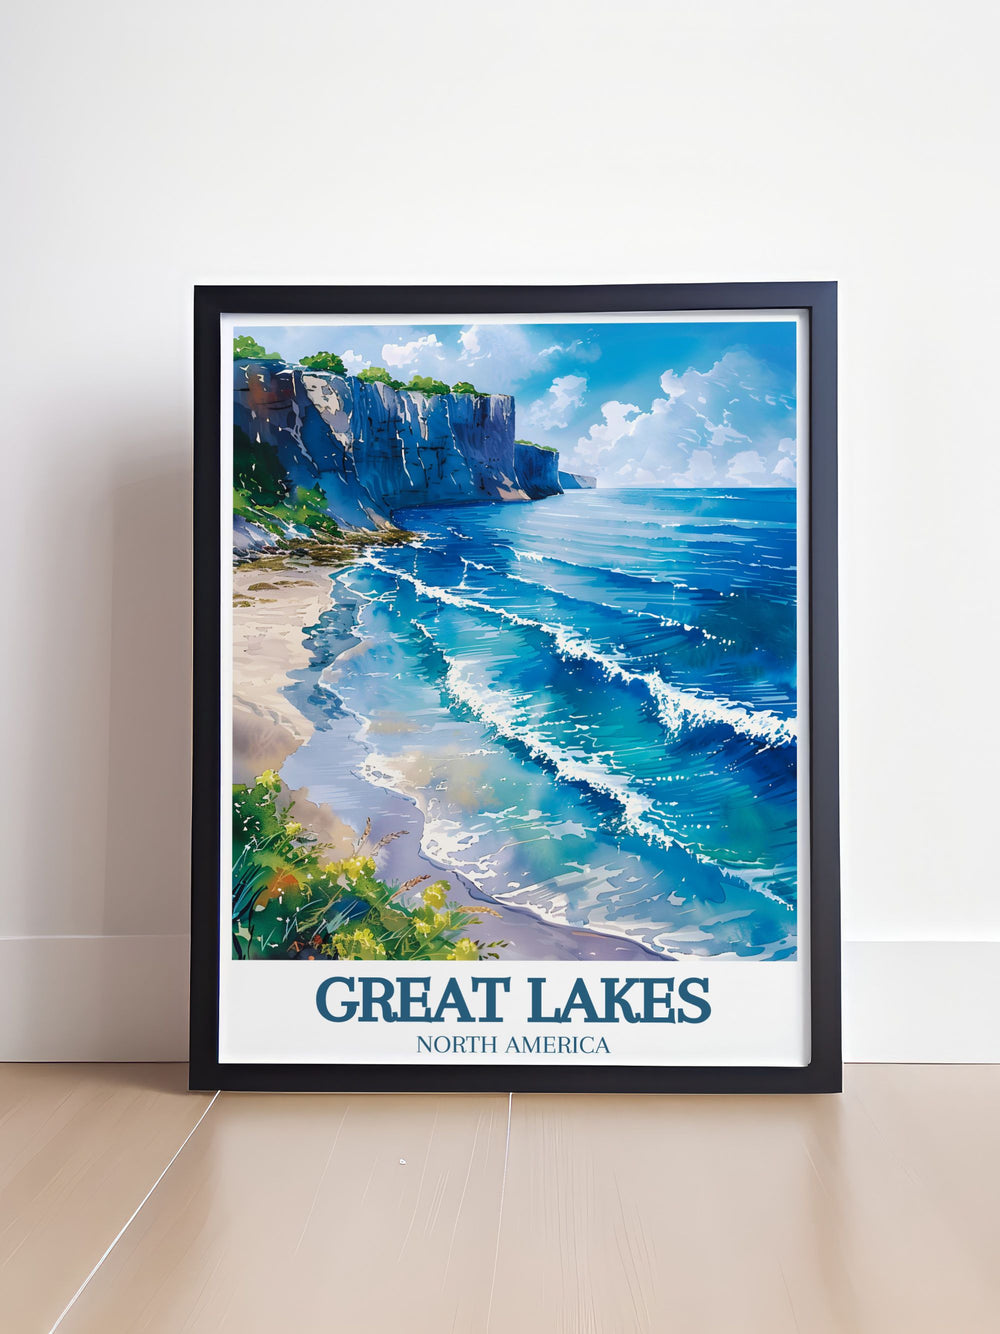 Capturing the tranquil beauty of Lake Erie, this travel poster highlights the serene environment and stunning sunsets, making it an ideal addition for nature lovers.